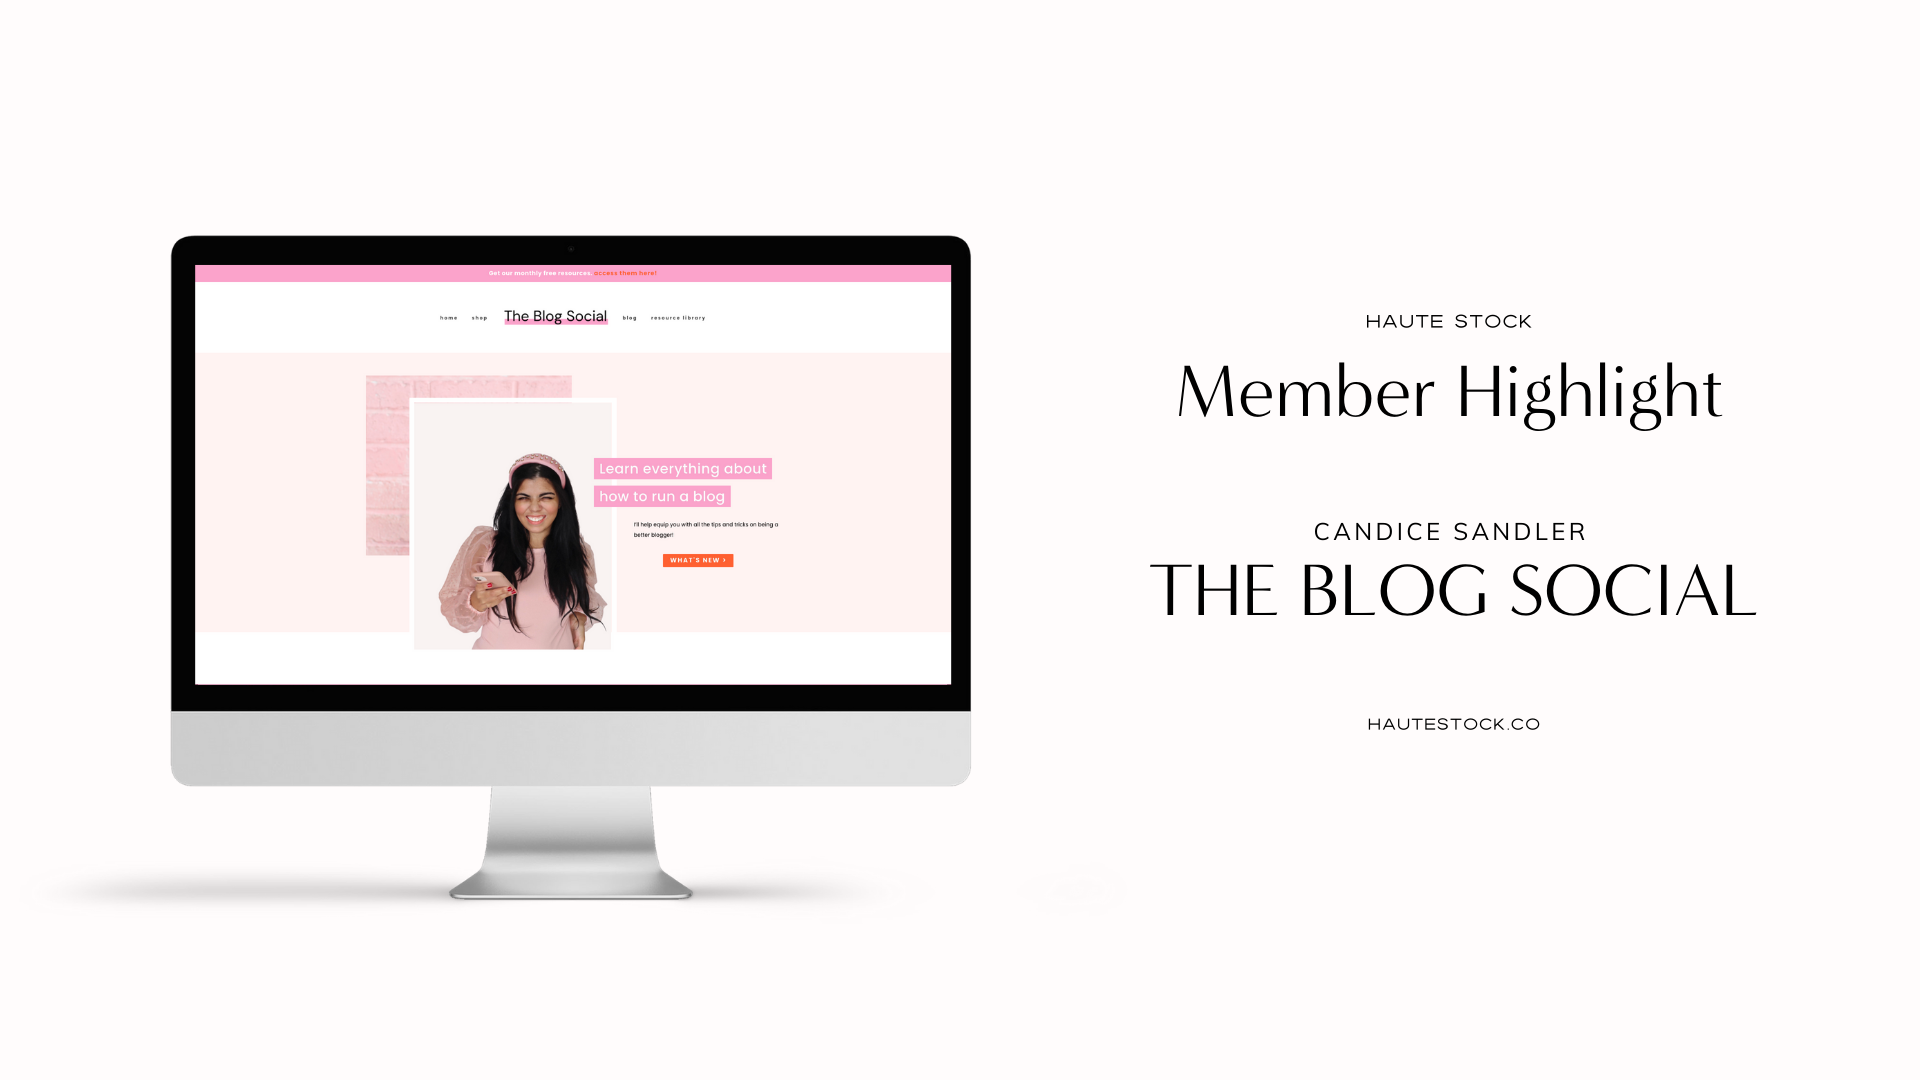 Meet Candice, Founder of The Blog Social, in this Haute Stock Member Feature!